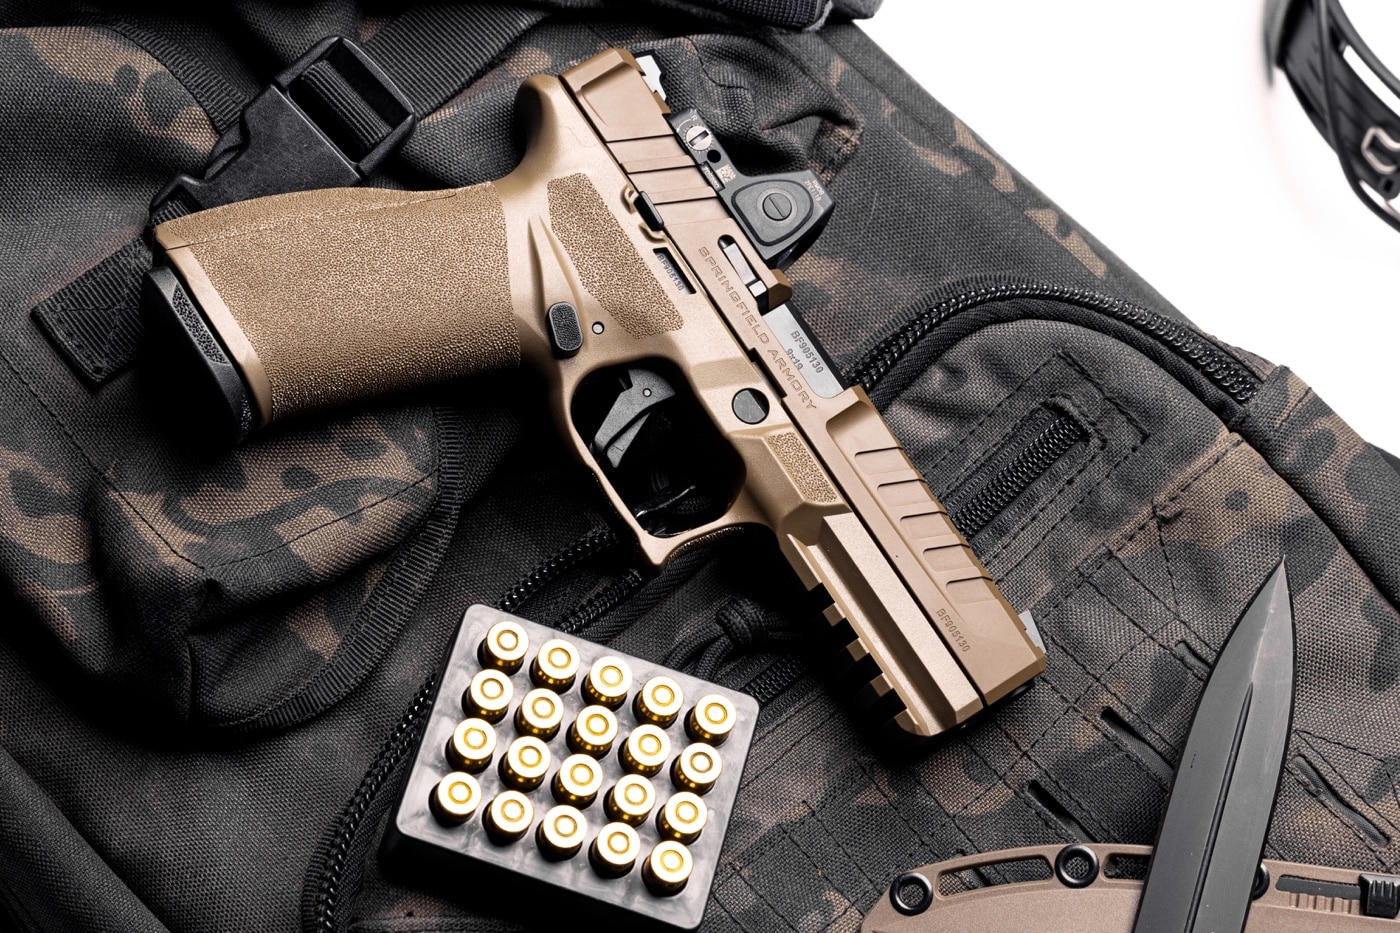 In this photograph, we see the right side of the Springfield Armory Echelon Desert FDE. We can see the deep slide serrations and aggressive grip texture on the polymer grip module.